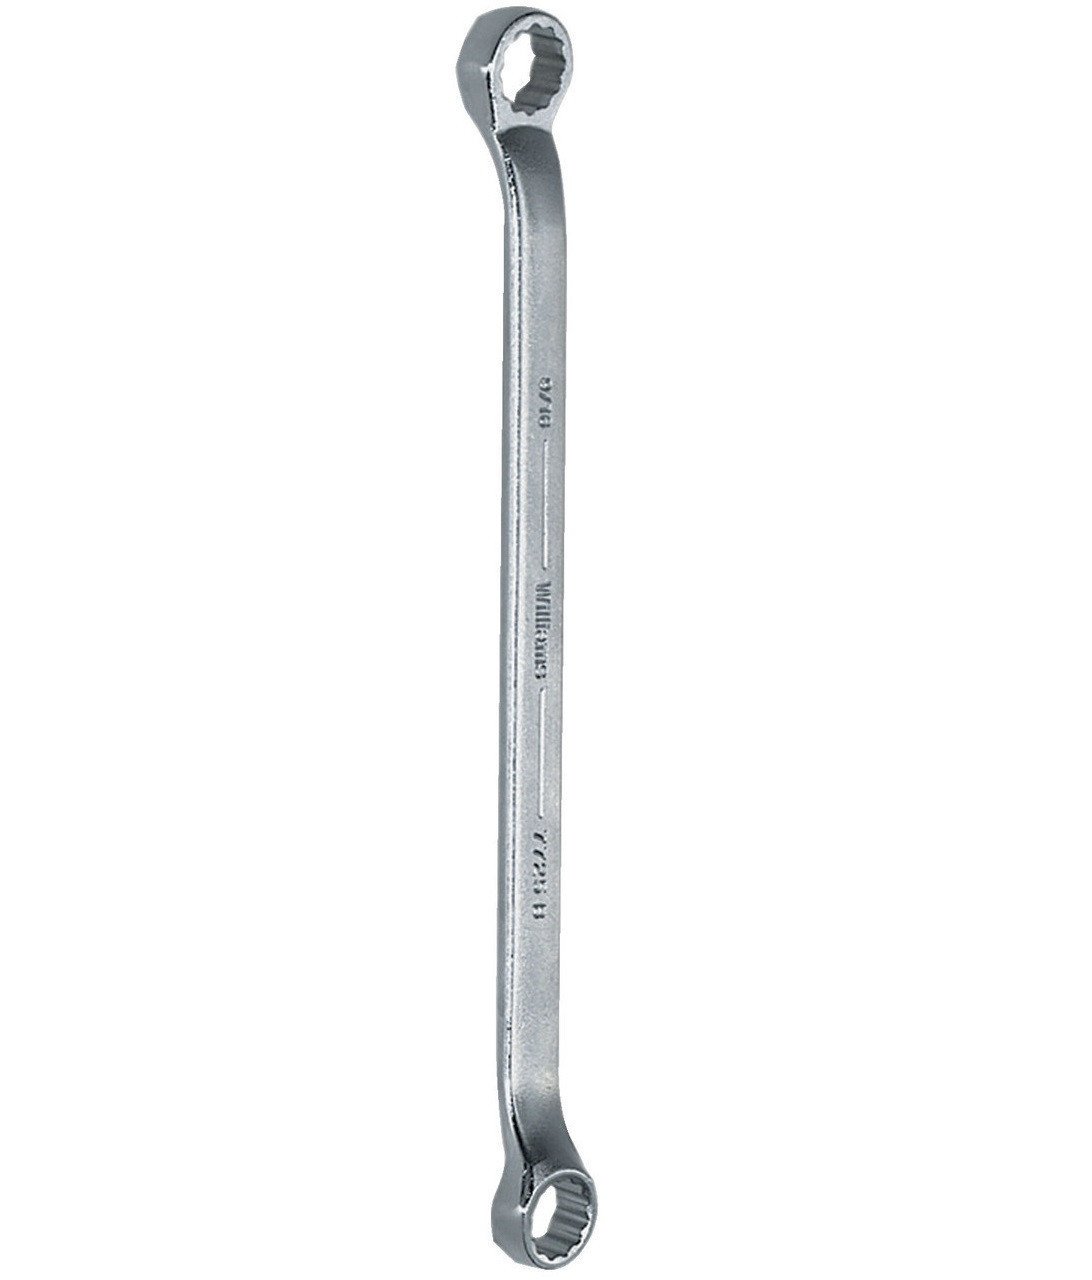 14x15MM Williams Satin Chrome Double Head 10 Degree Offset Box End Wrench 12 PT - JHWBWM-1415